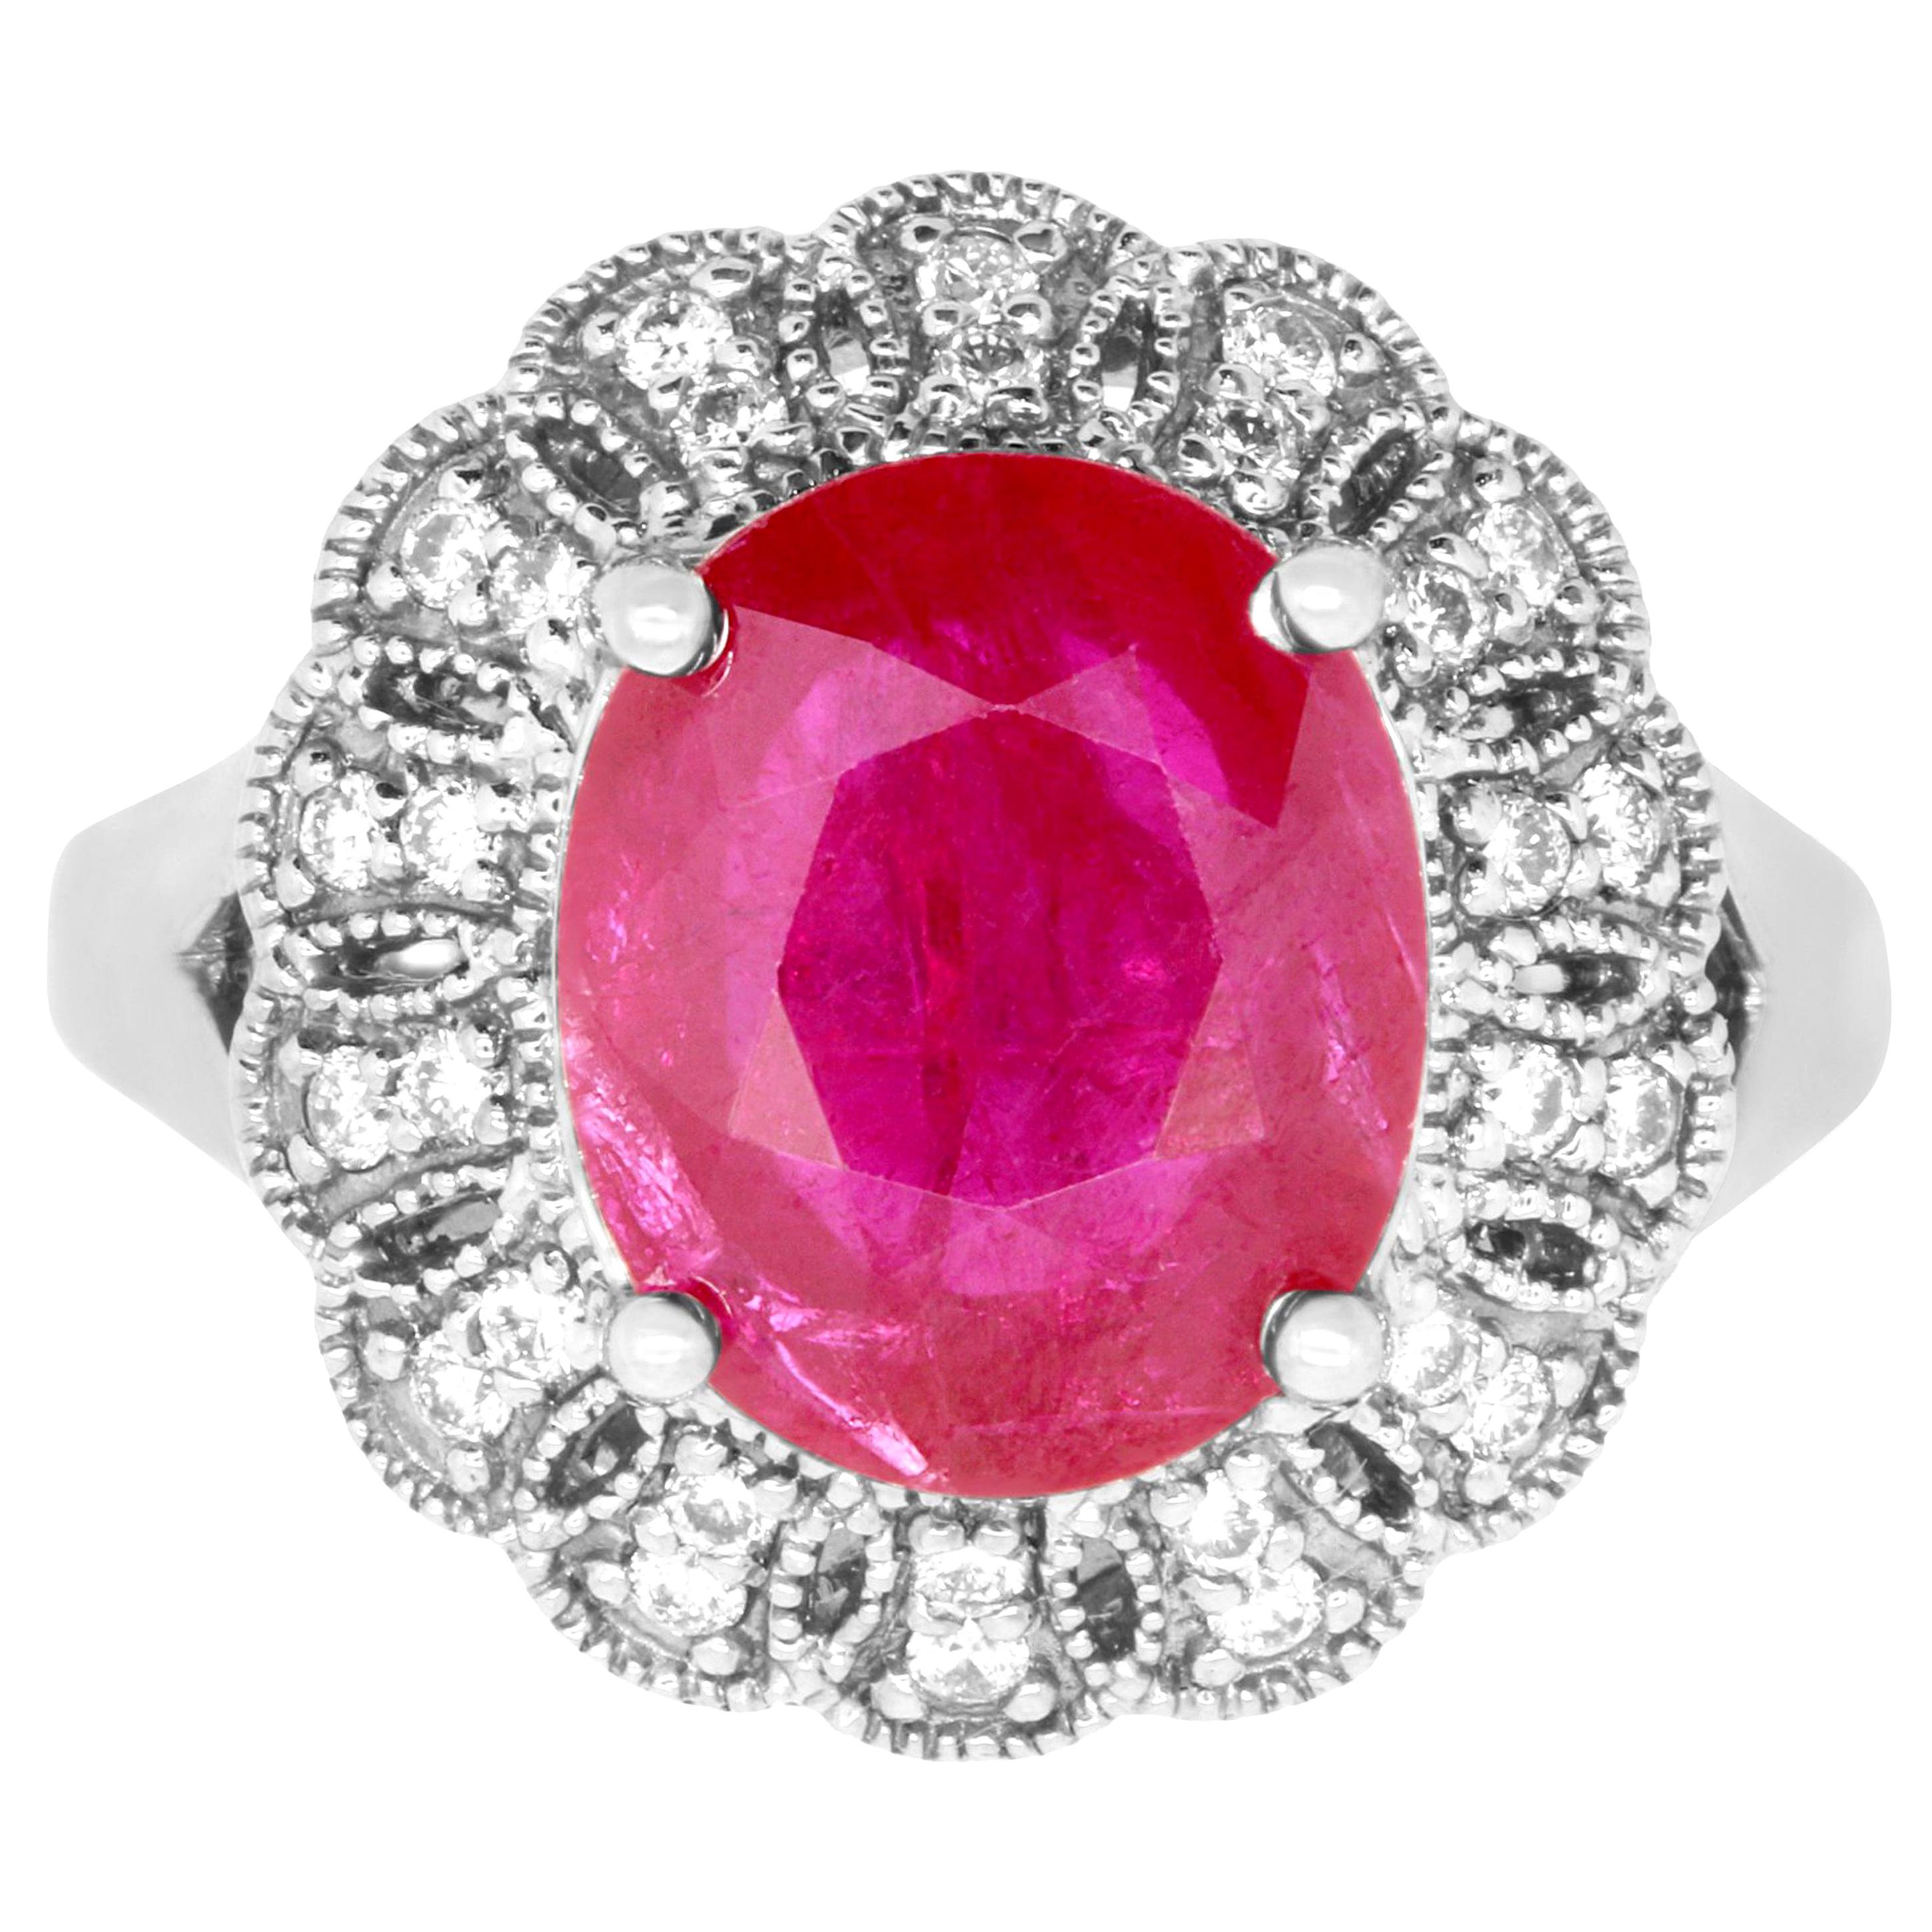 4.42 Carat Oval Ruby and 0.34 Carat White Diamond Ring